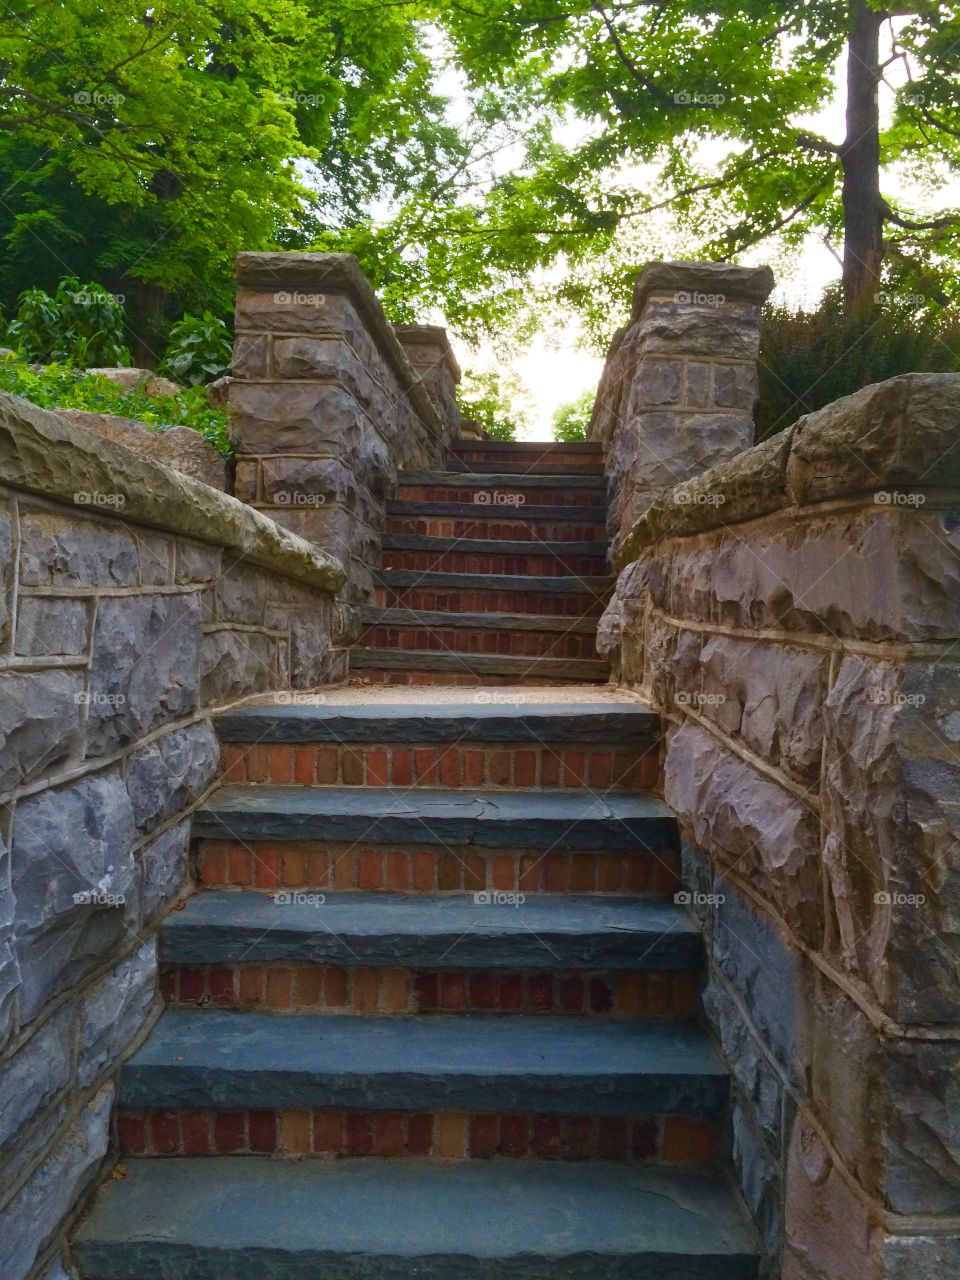 Outdoor Stairs. Outdoor stone stairs in Blairstown, NJ